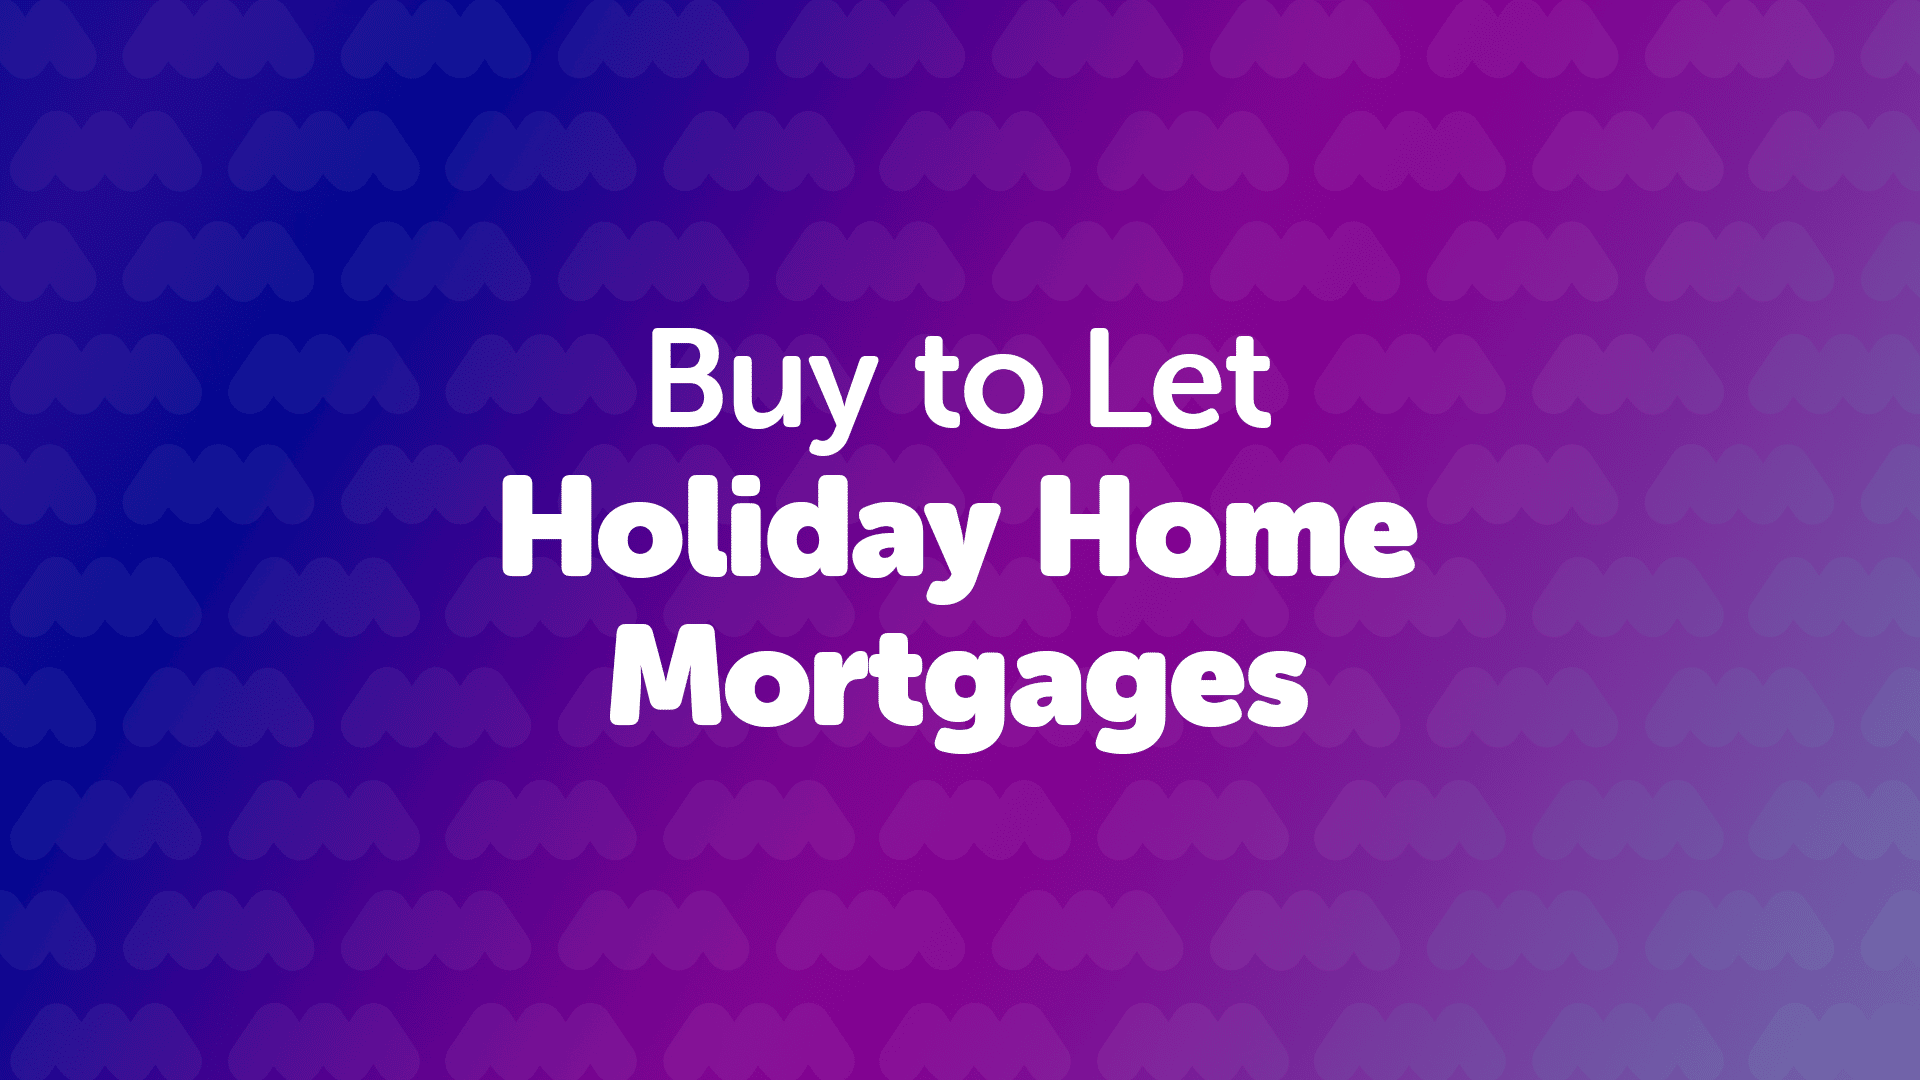 Buy to Let Holiday Home Mortgages